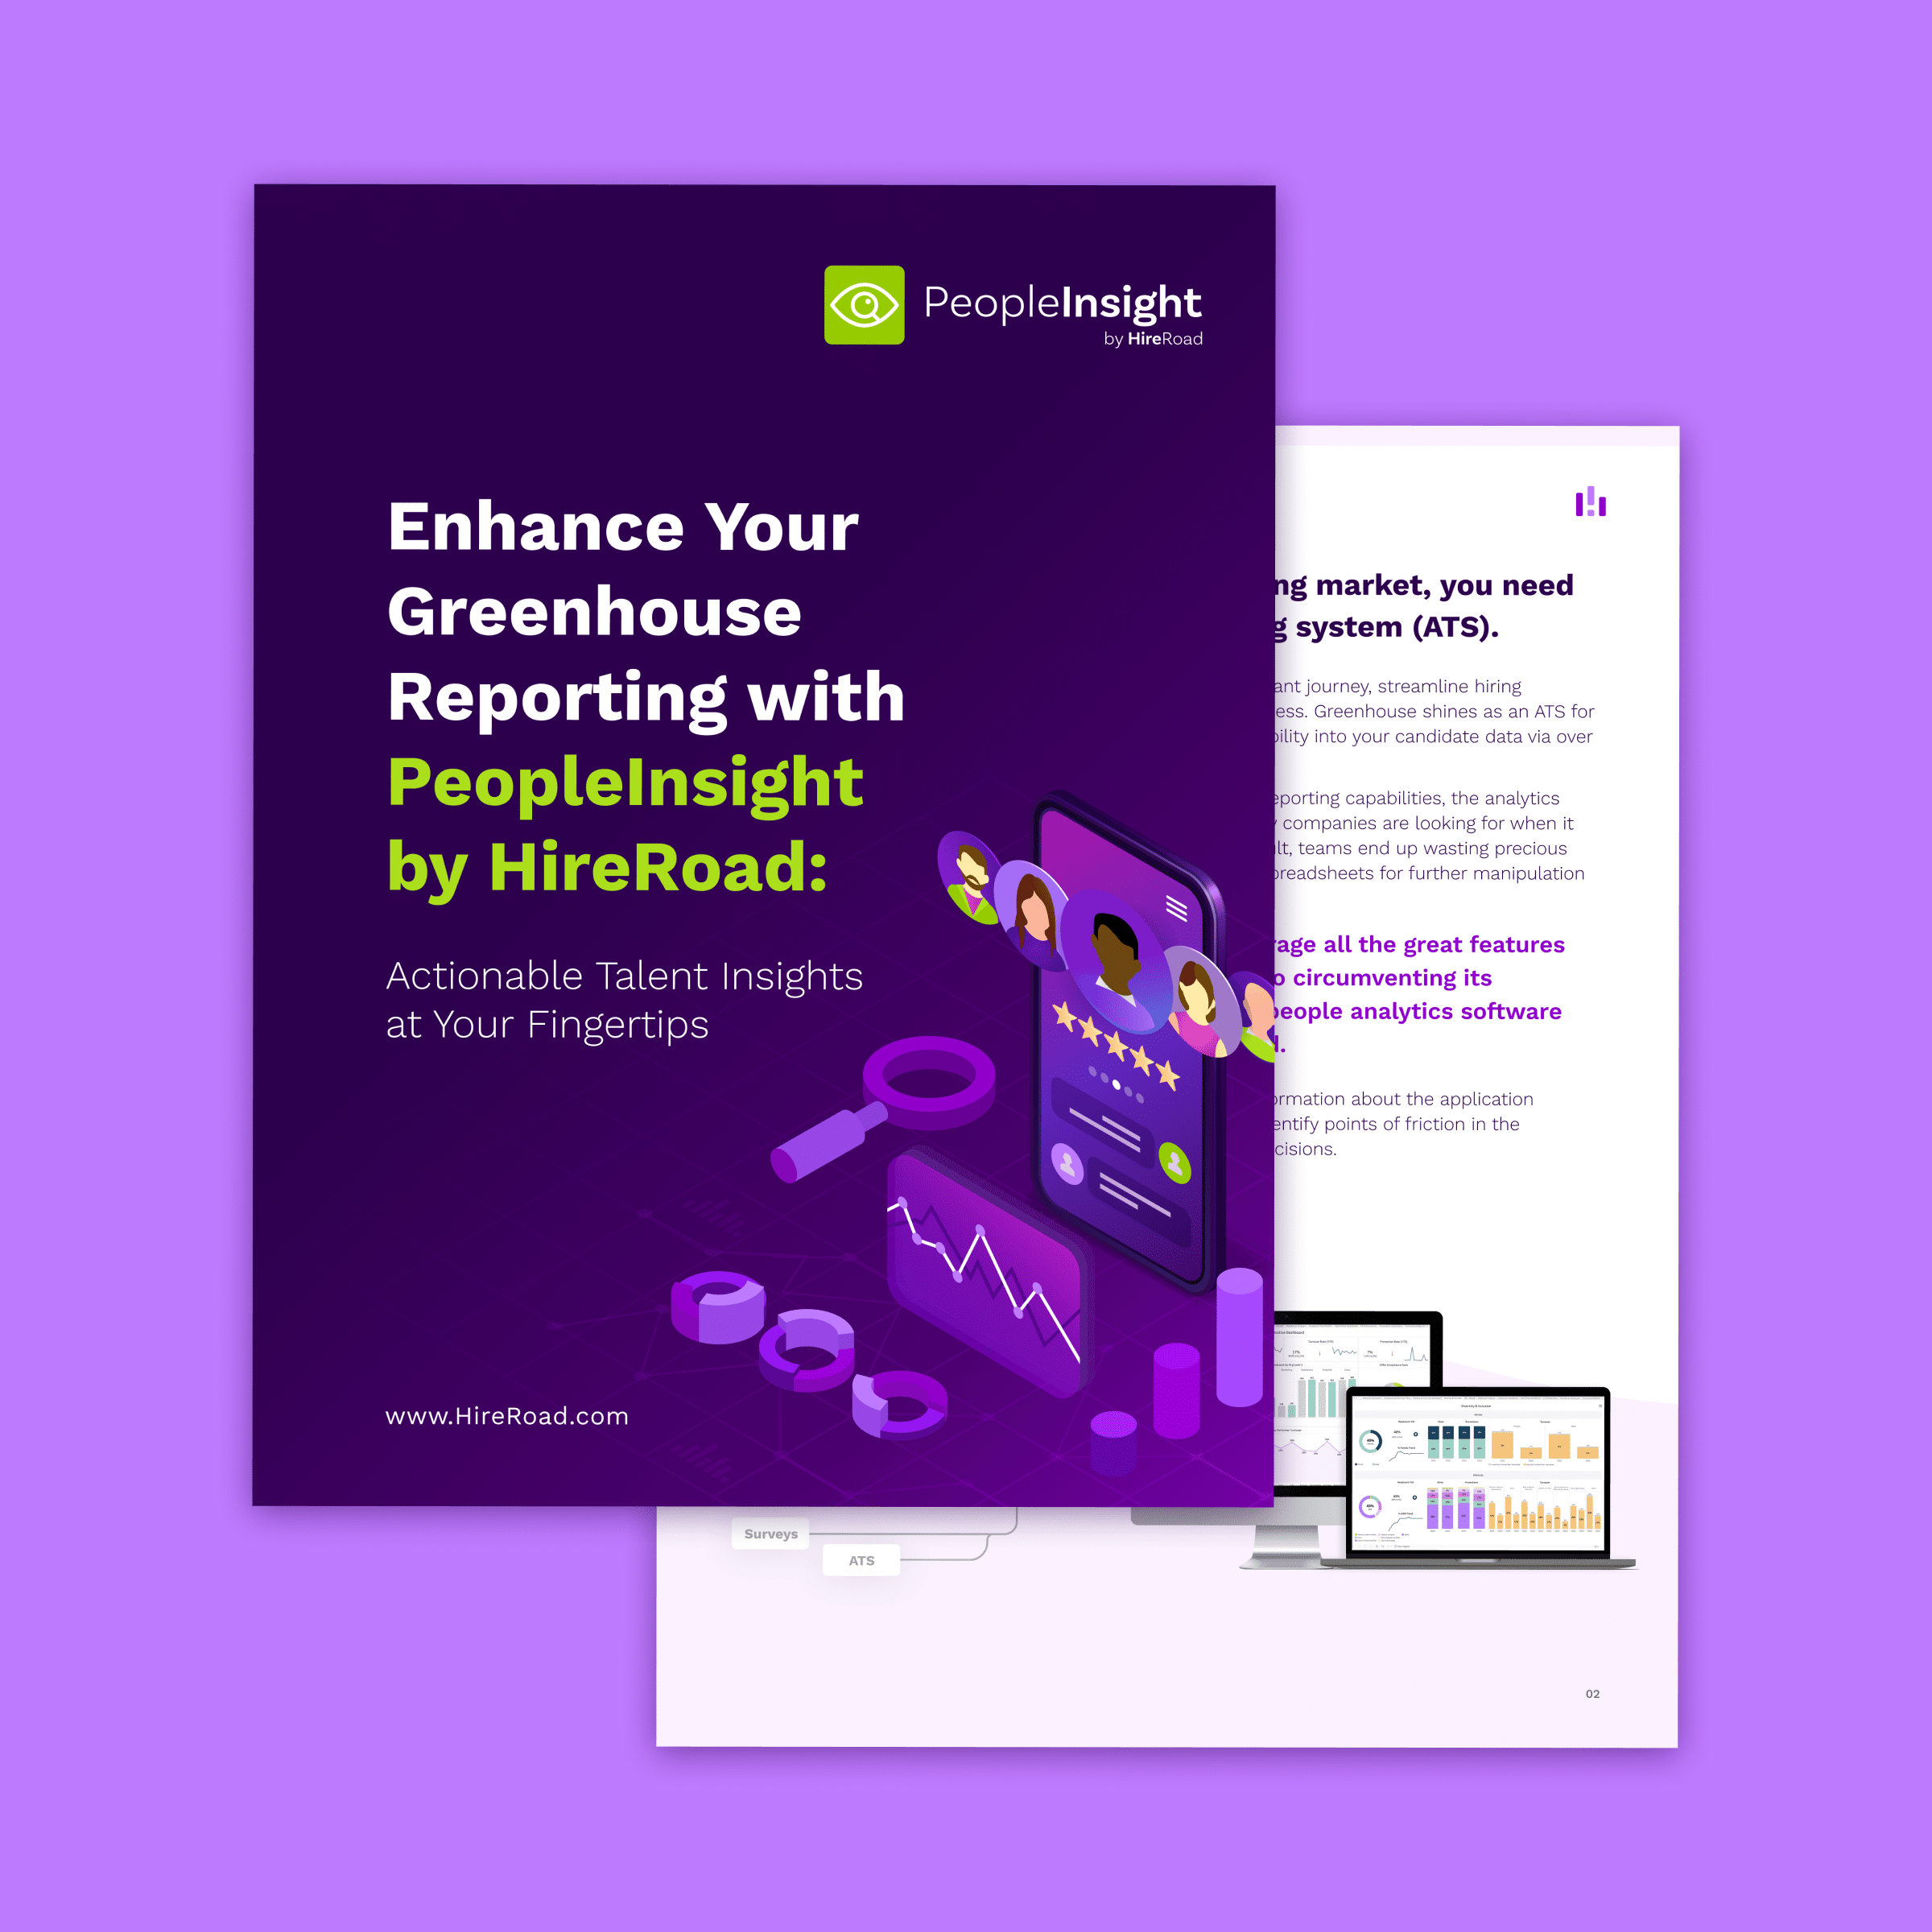 Greenhouse reporting made easy whitepaper thumbnail